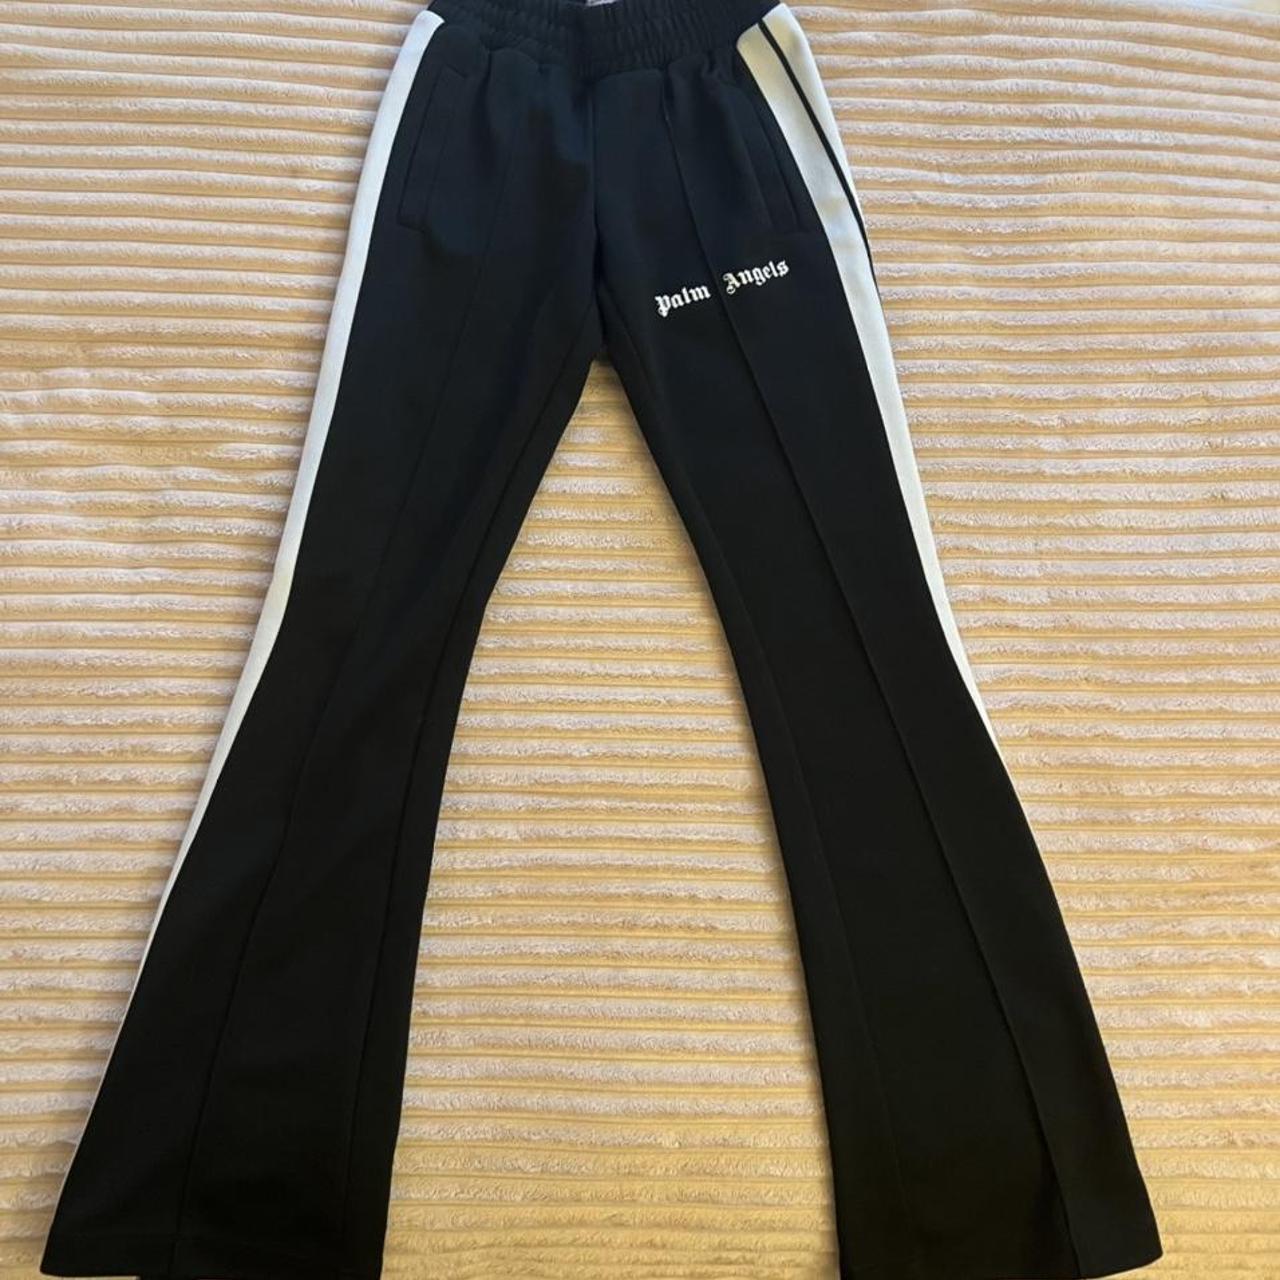 Palm Angels Women's Black and White Trousers (2)